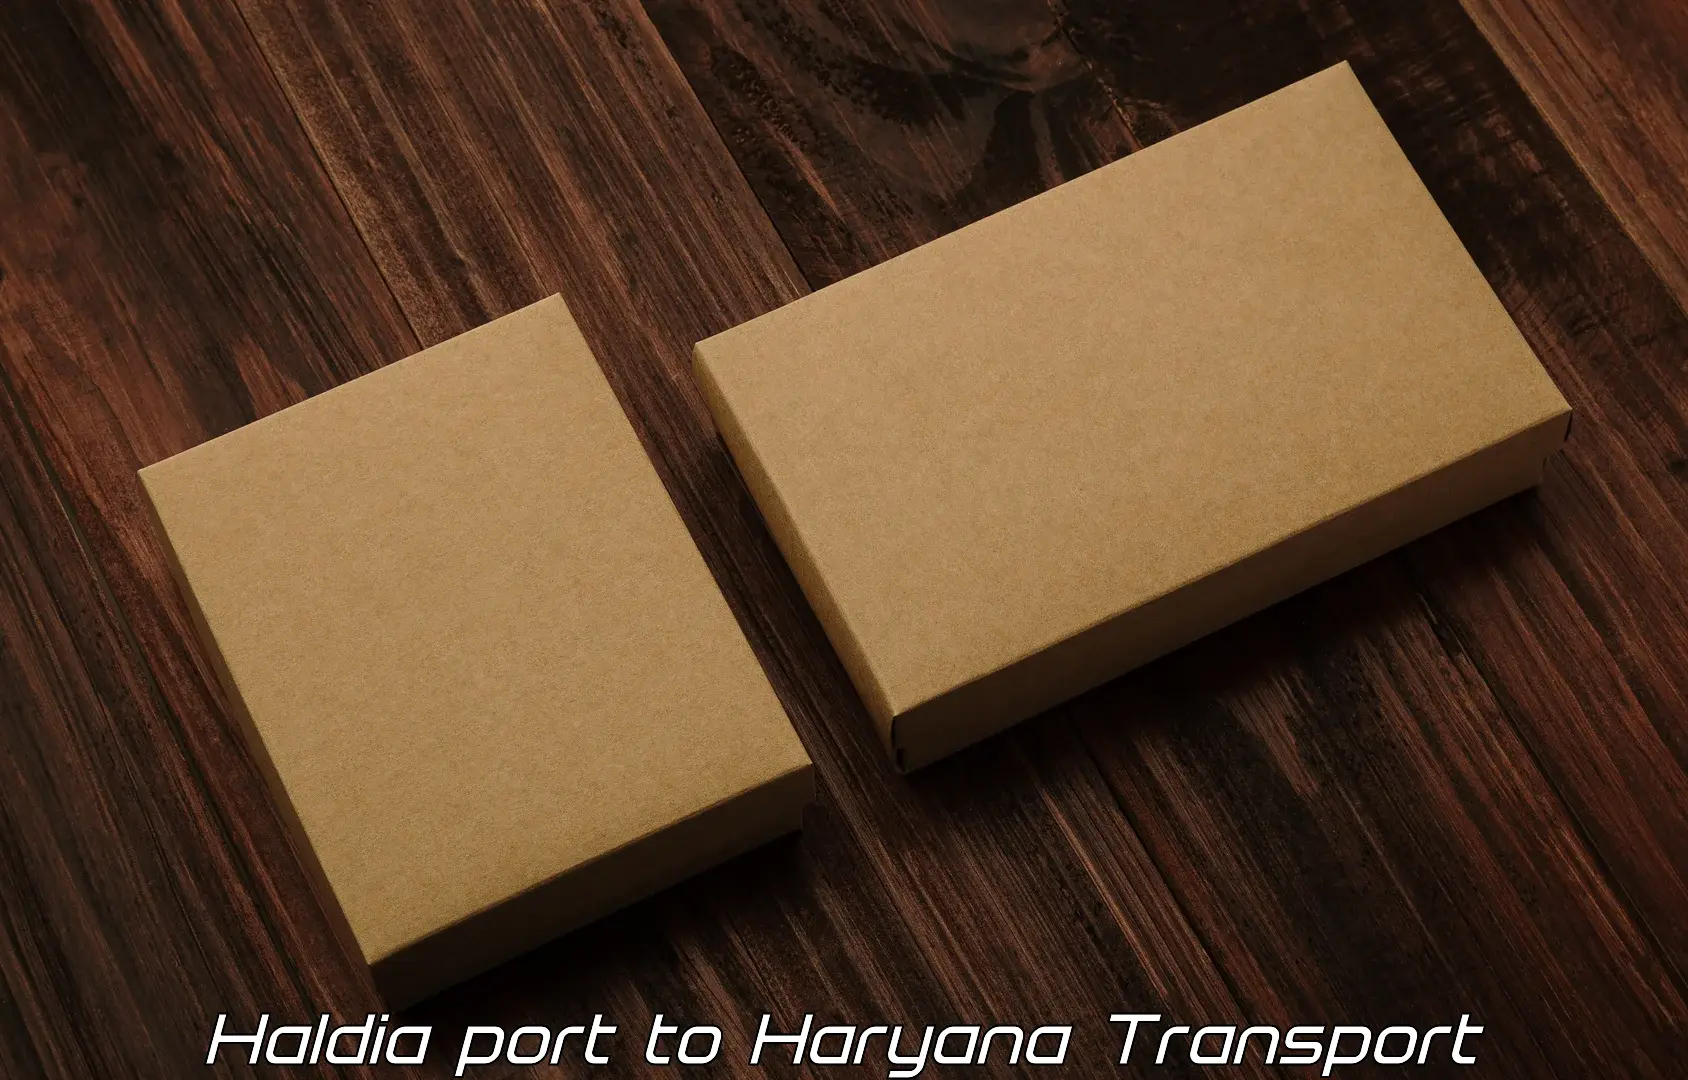 Transport bike from one state to another Haldia port to Kaithal